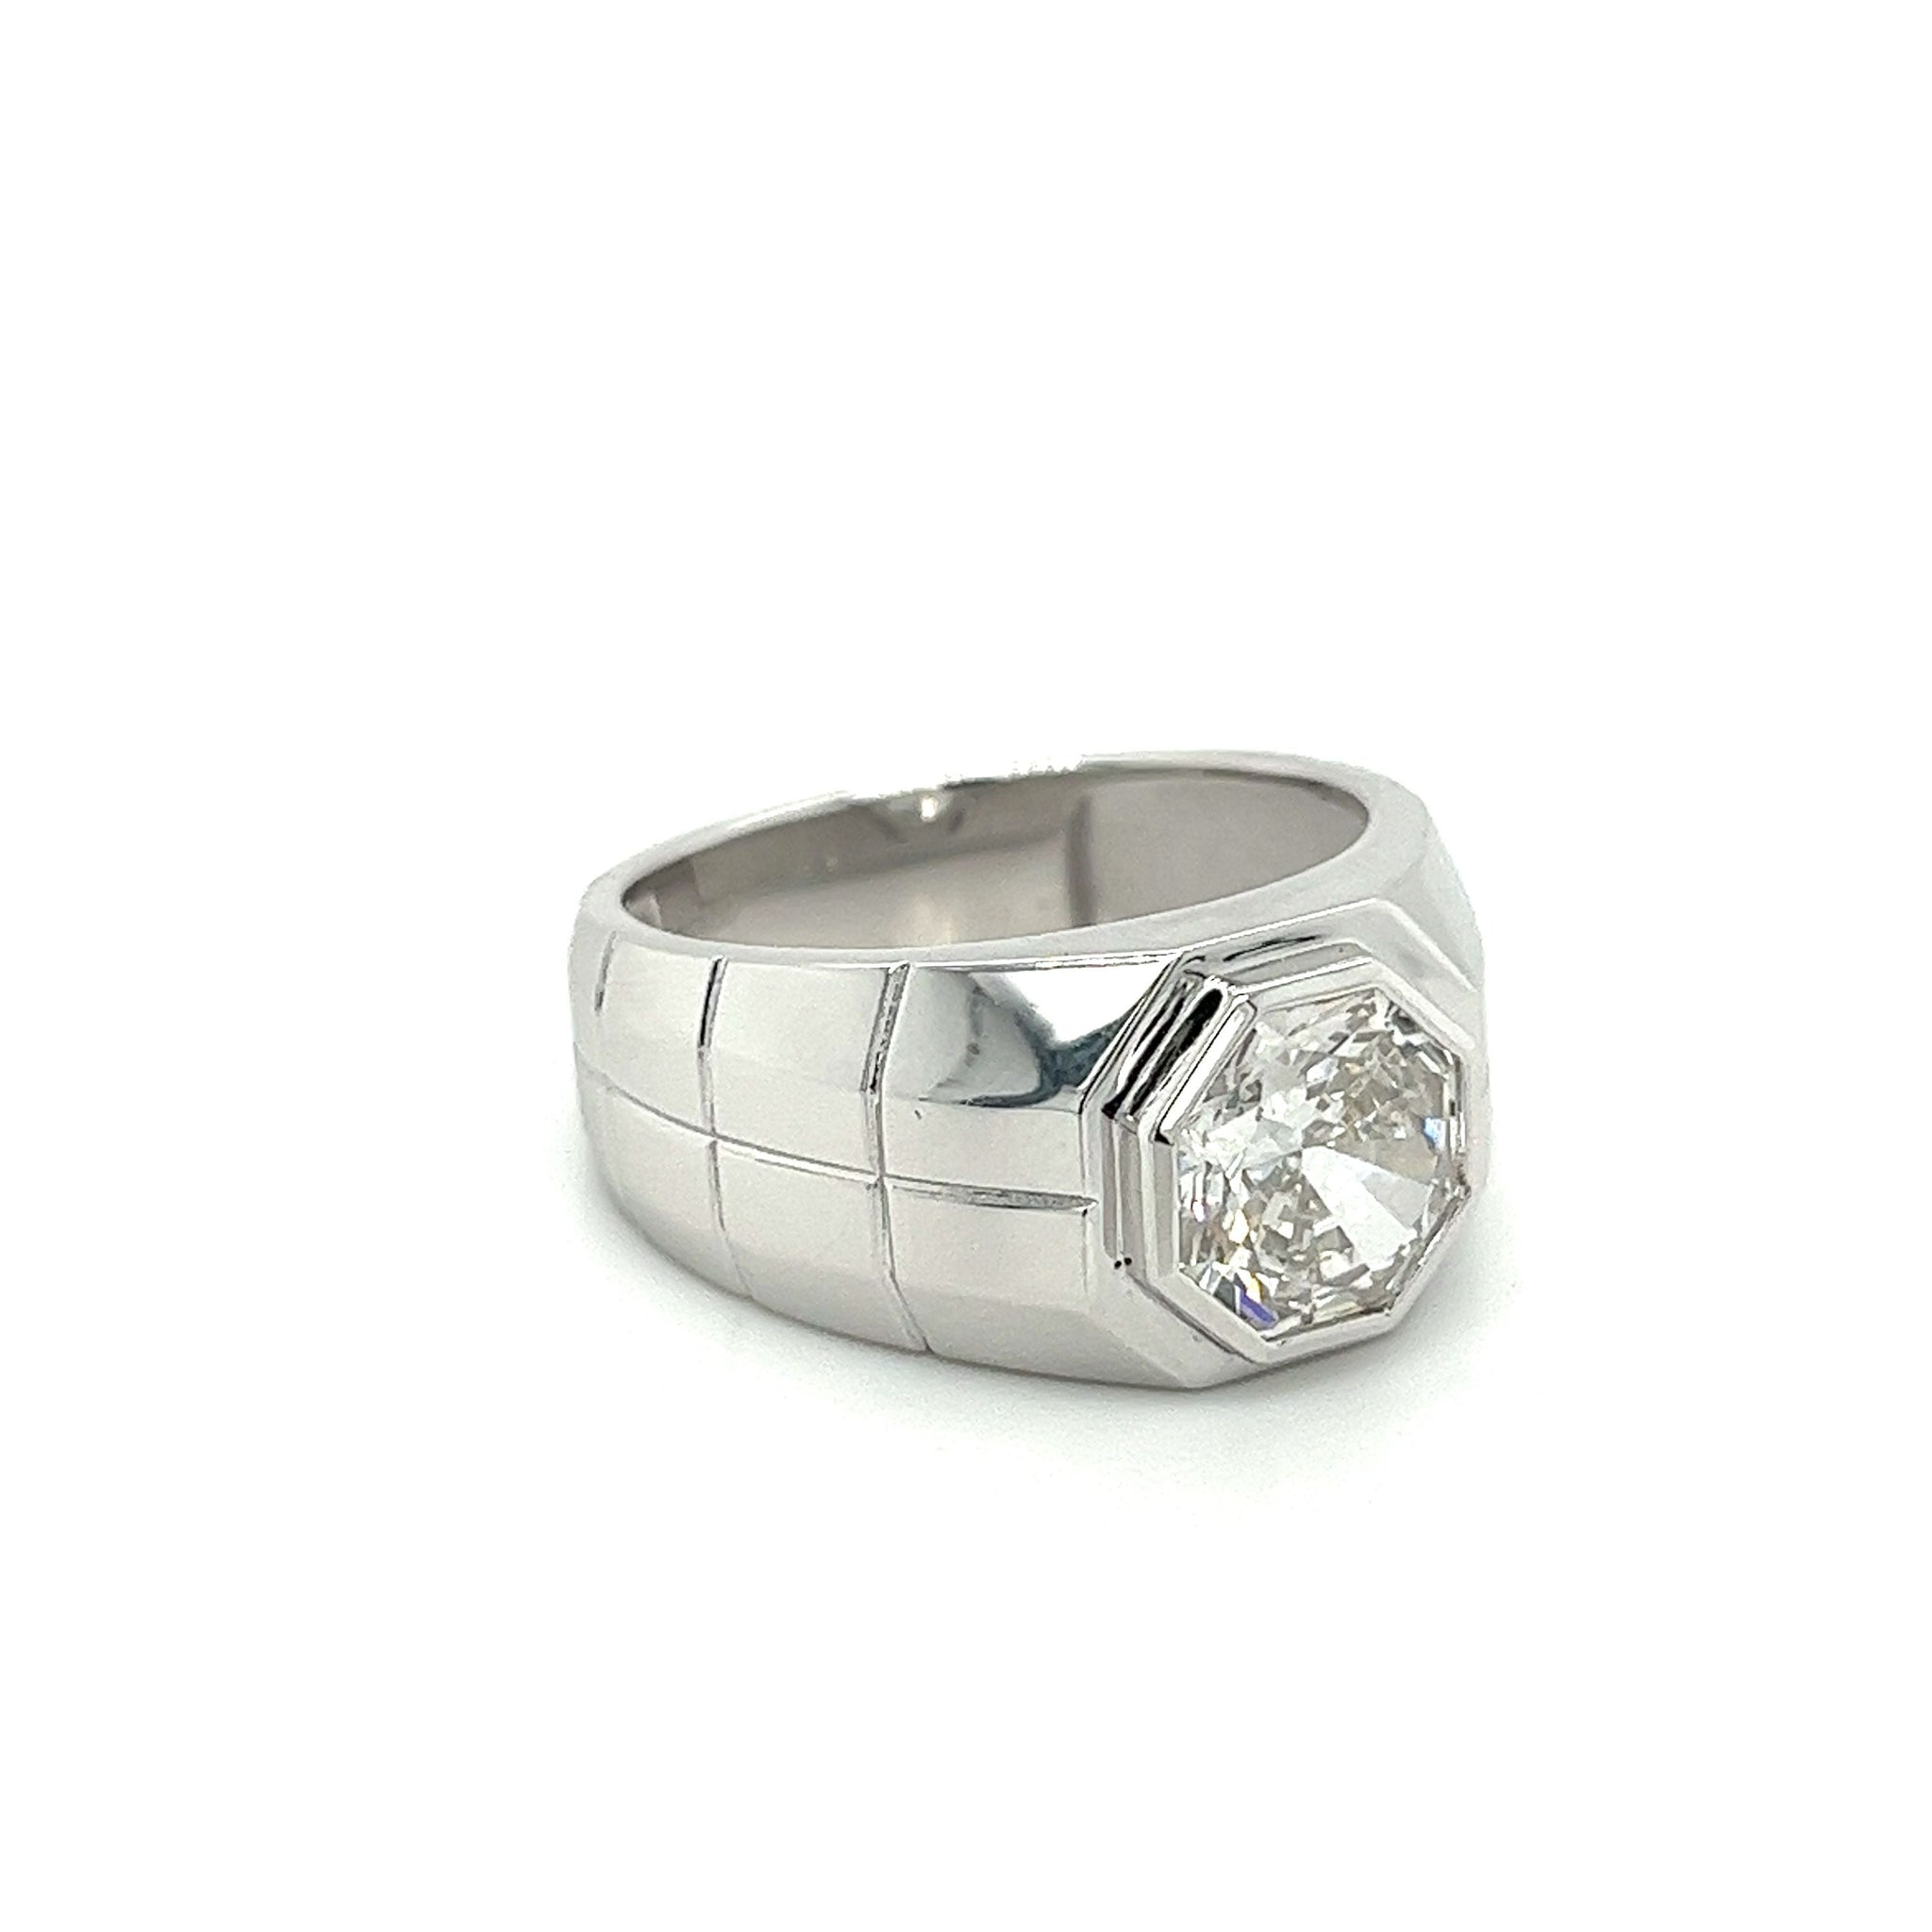 CRB4084700 - LOVE ring - White gold - Cartier